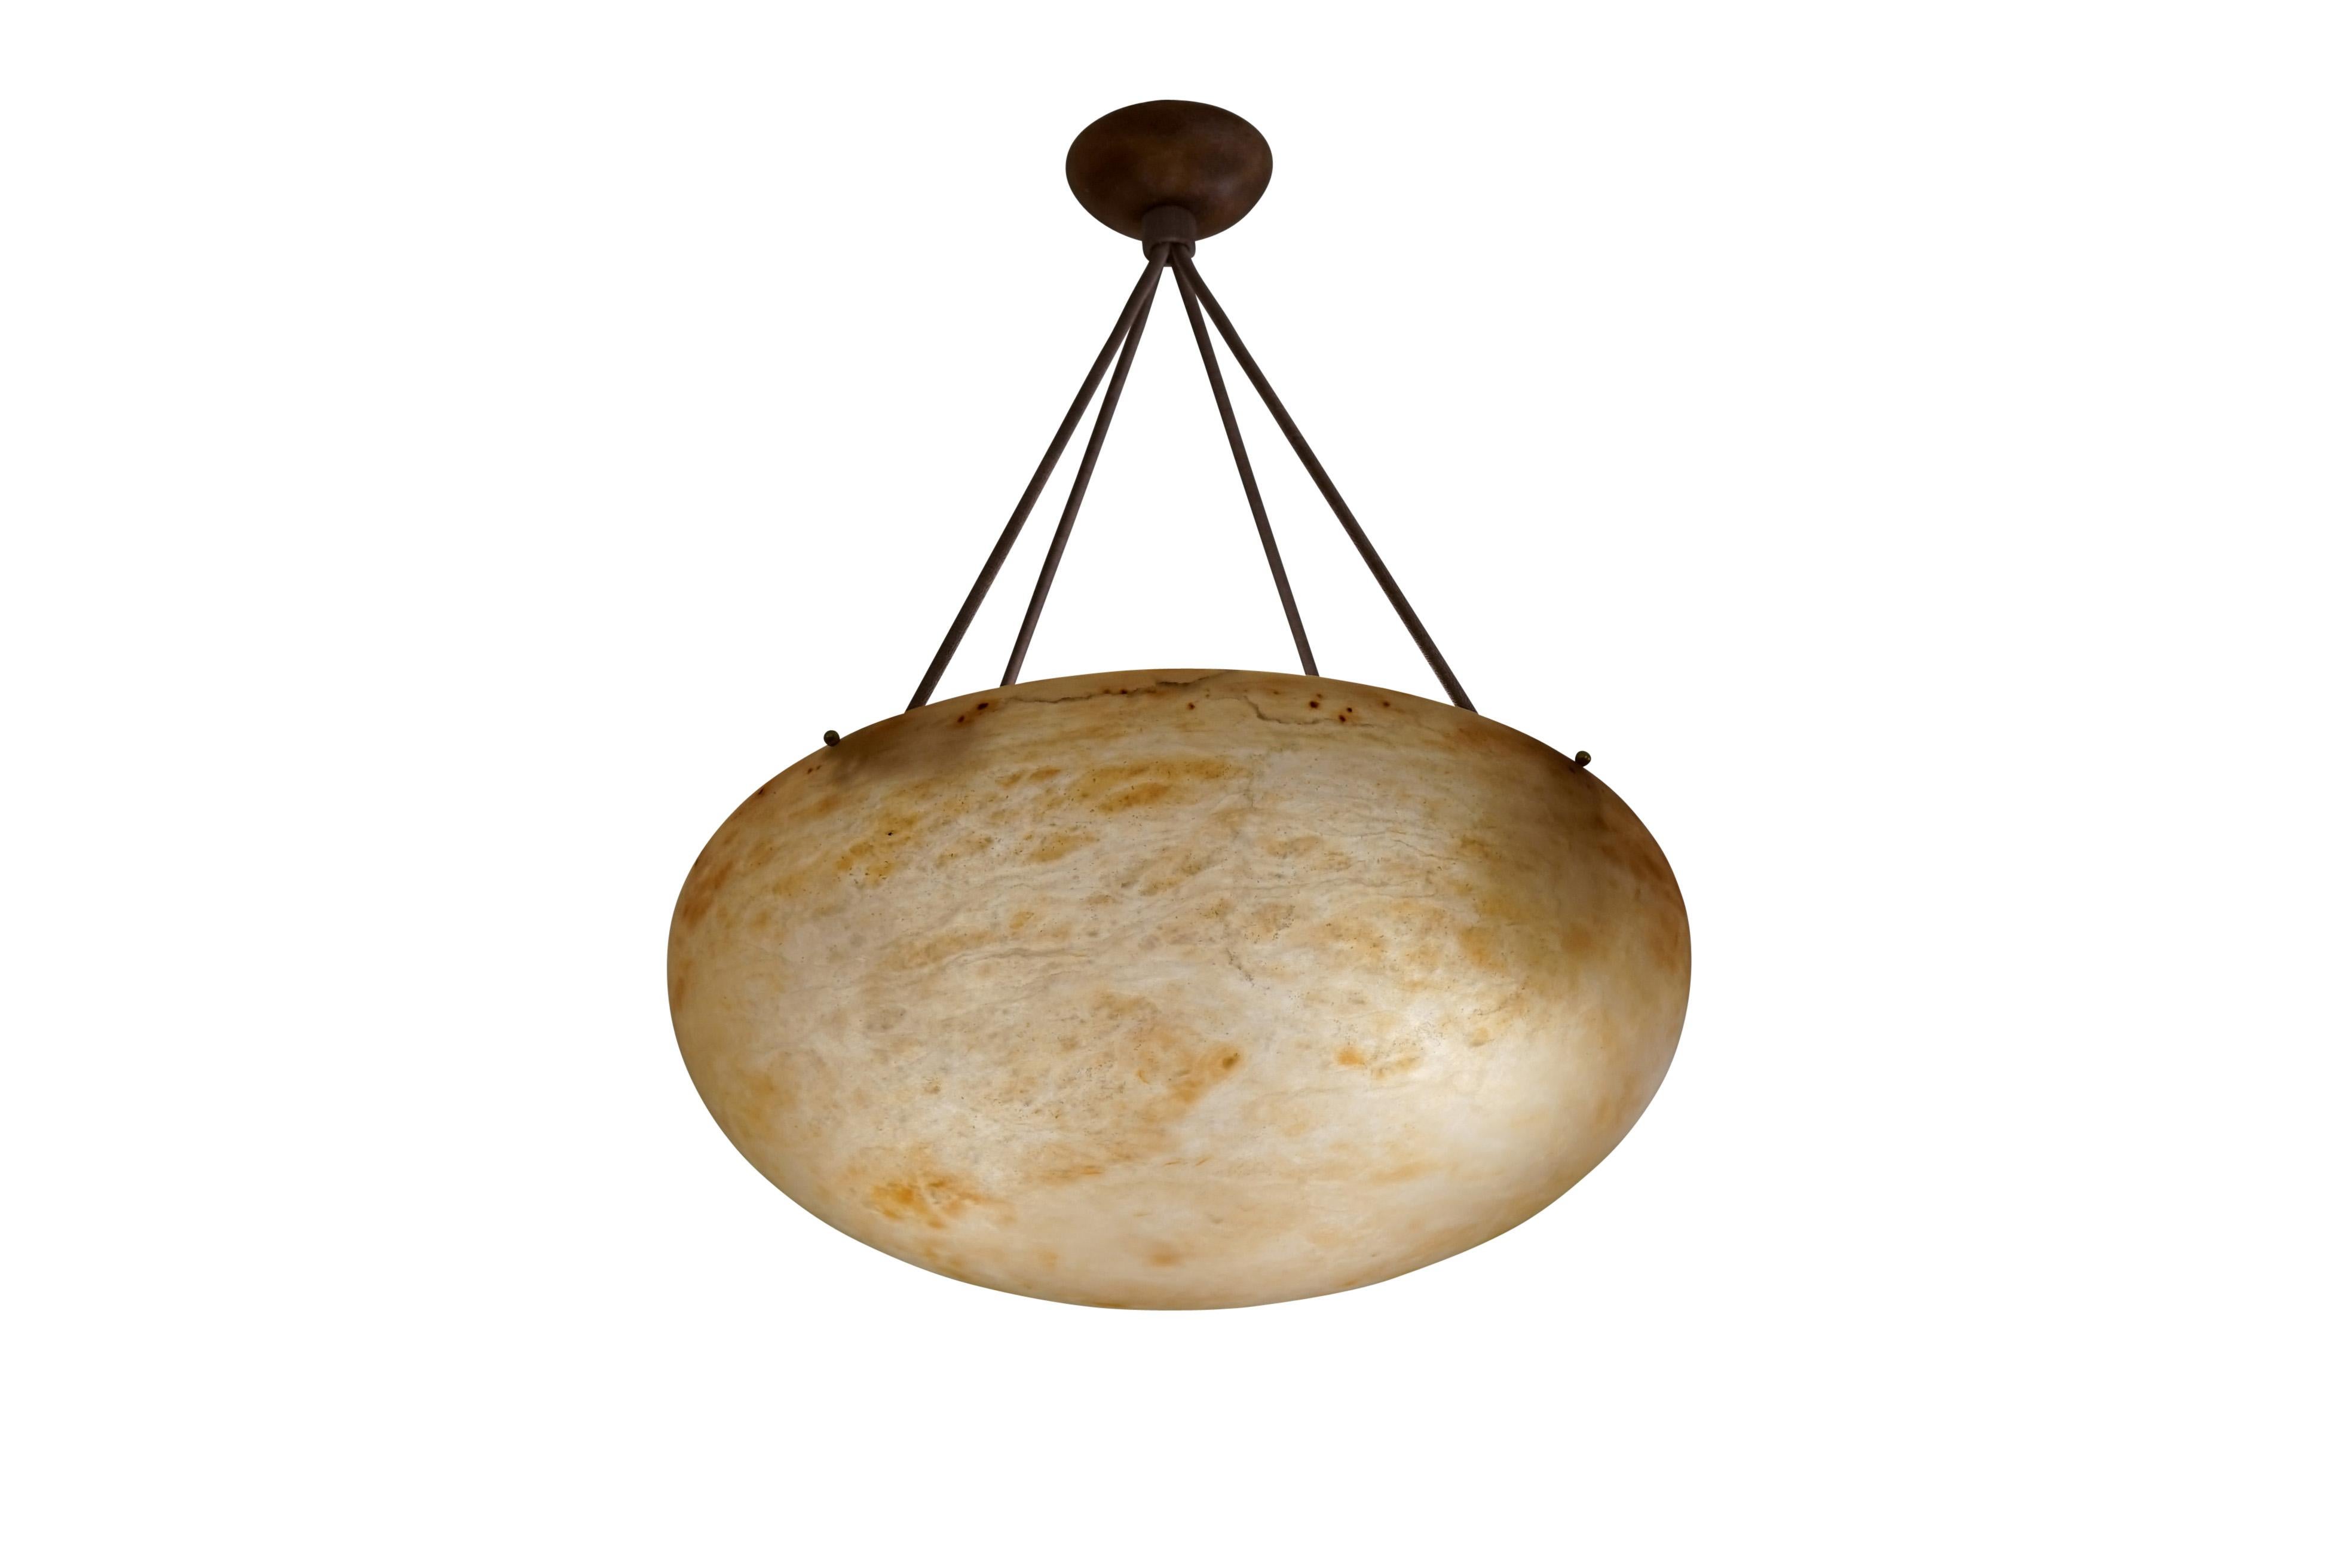 A wonderfully proportioned full size fixture is perfect as a primary light source and as a focal point in any room.